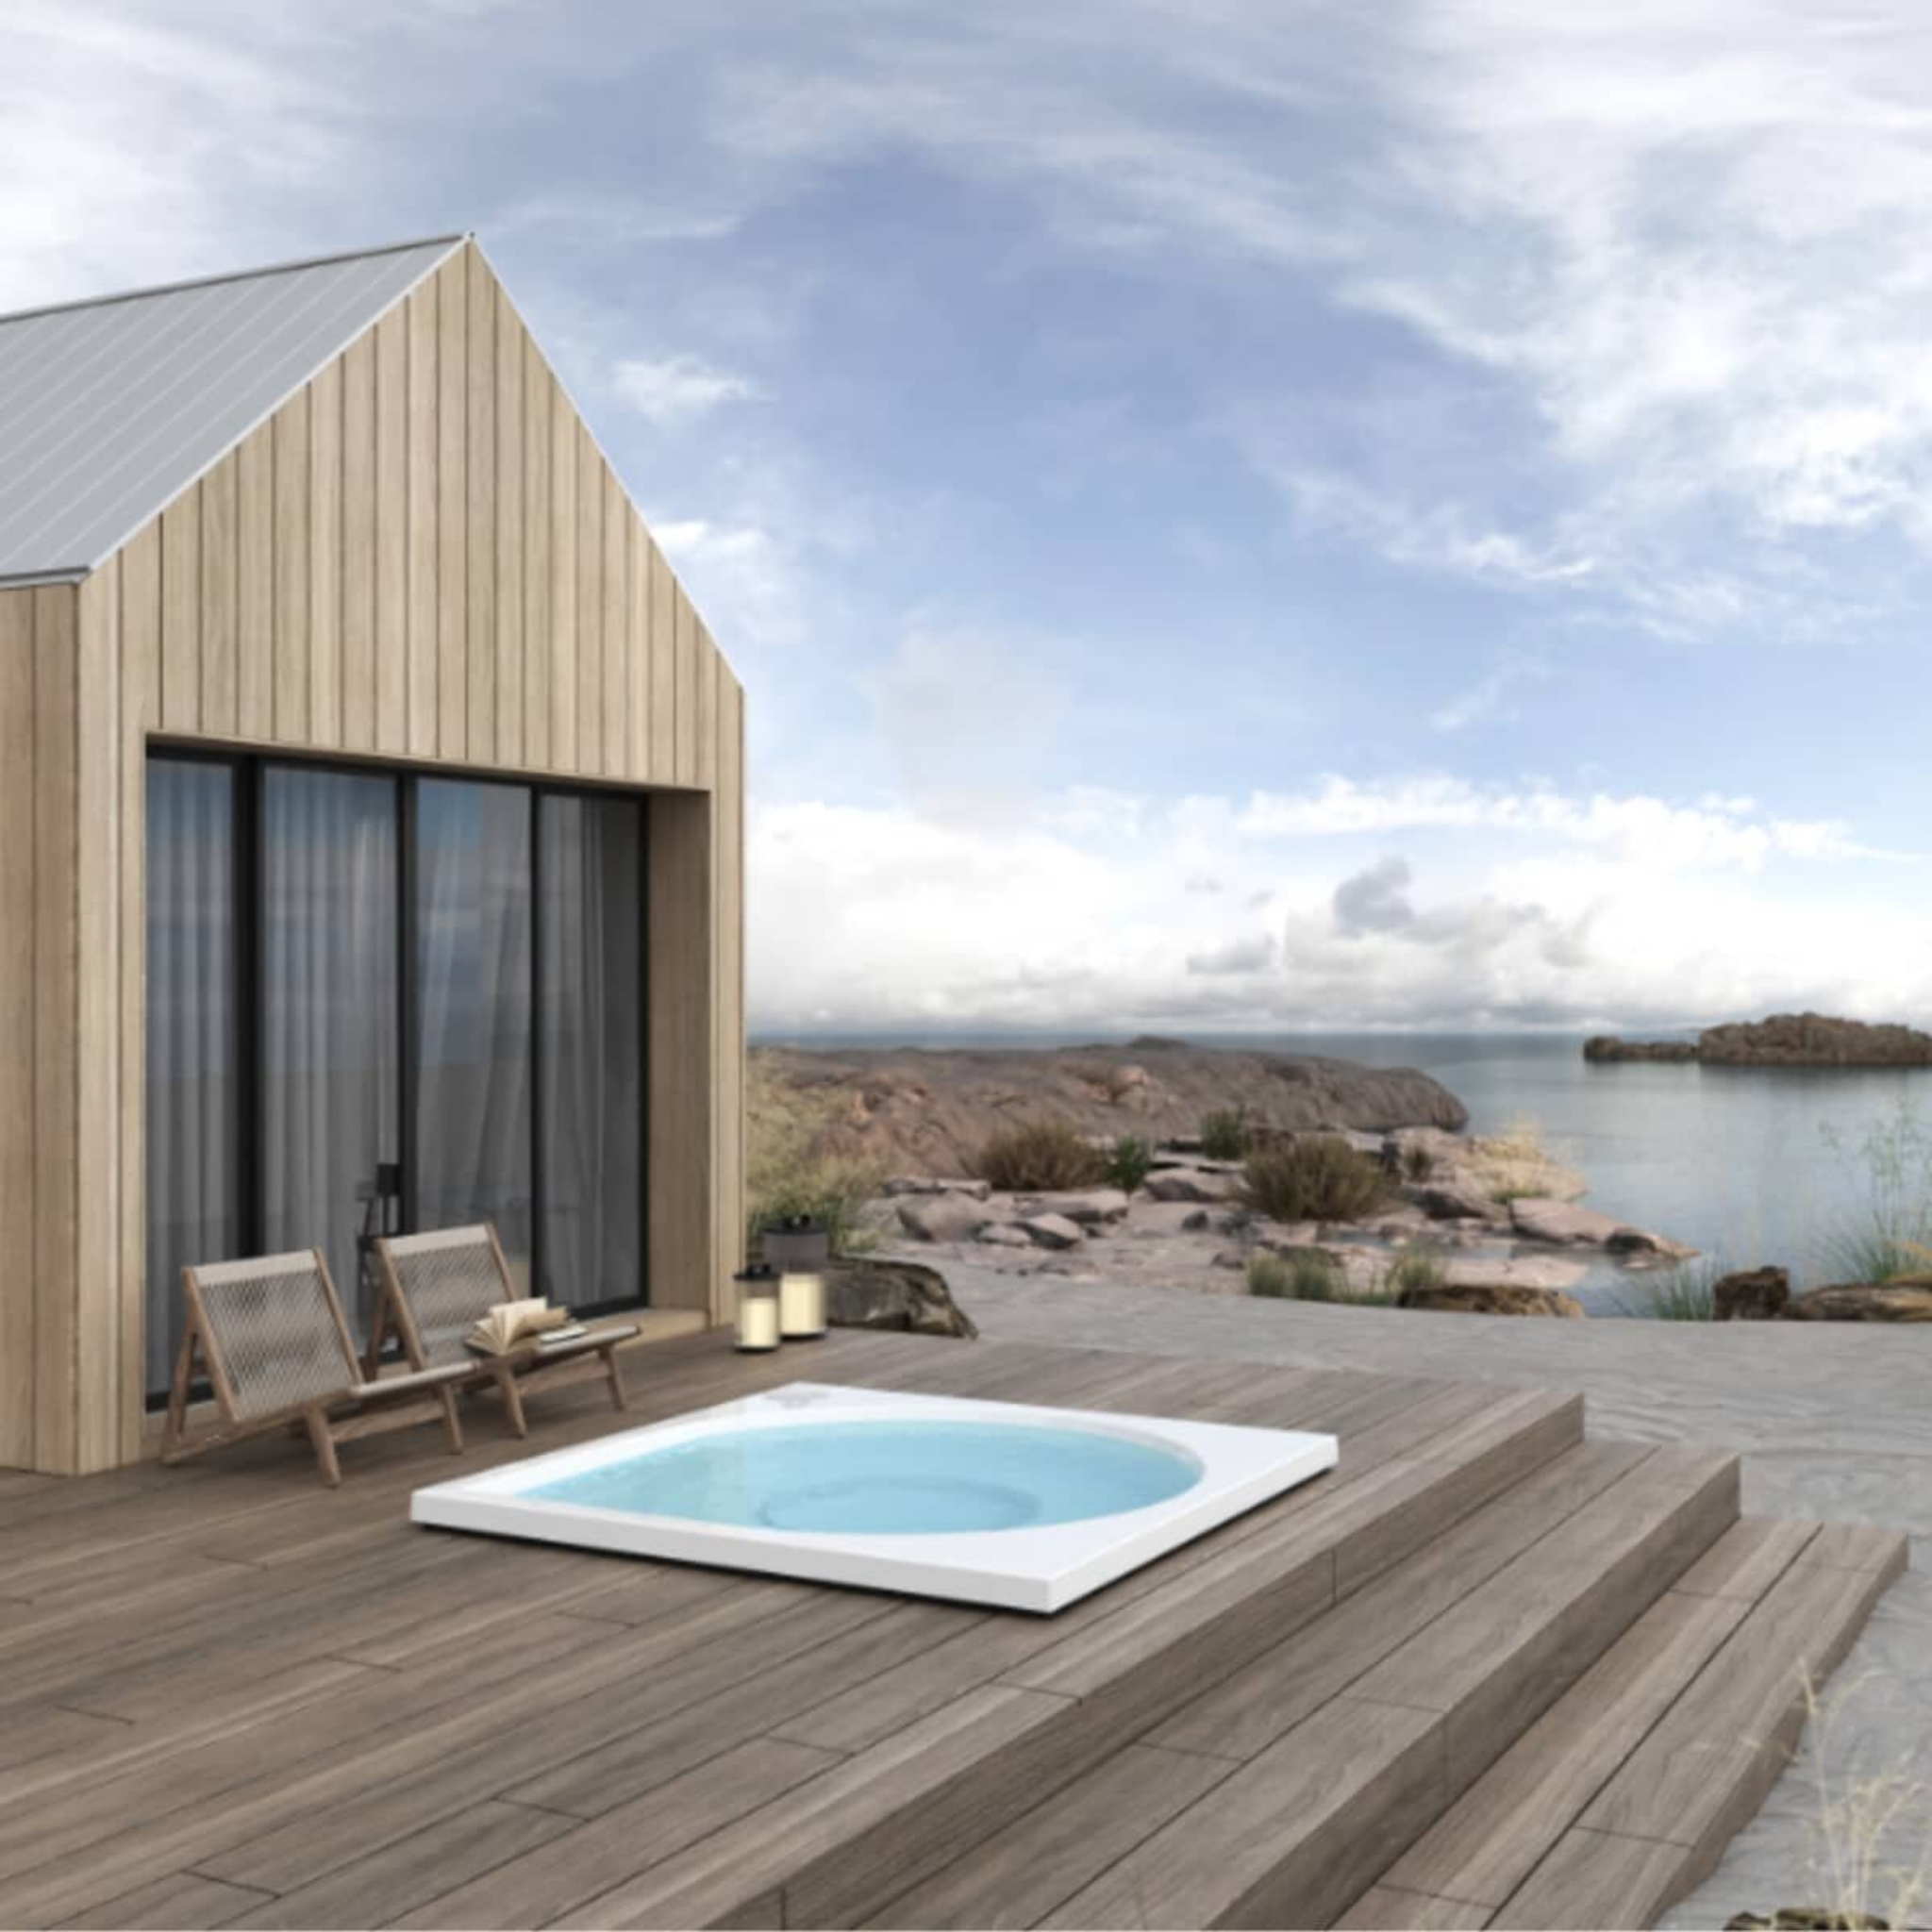 Vuolle Outdoor Hot Tub by Drop Spa